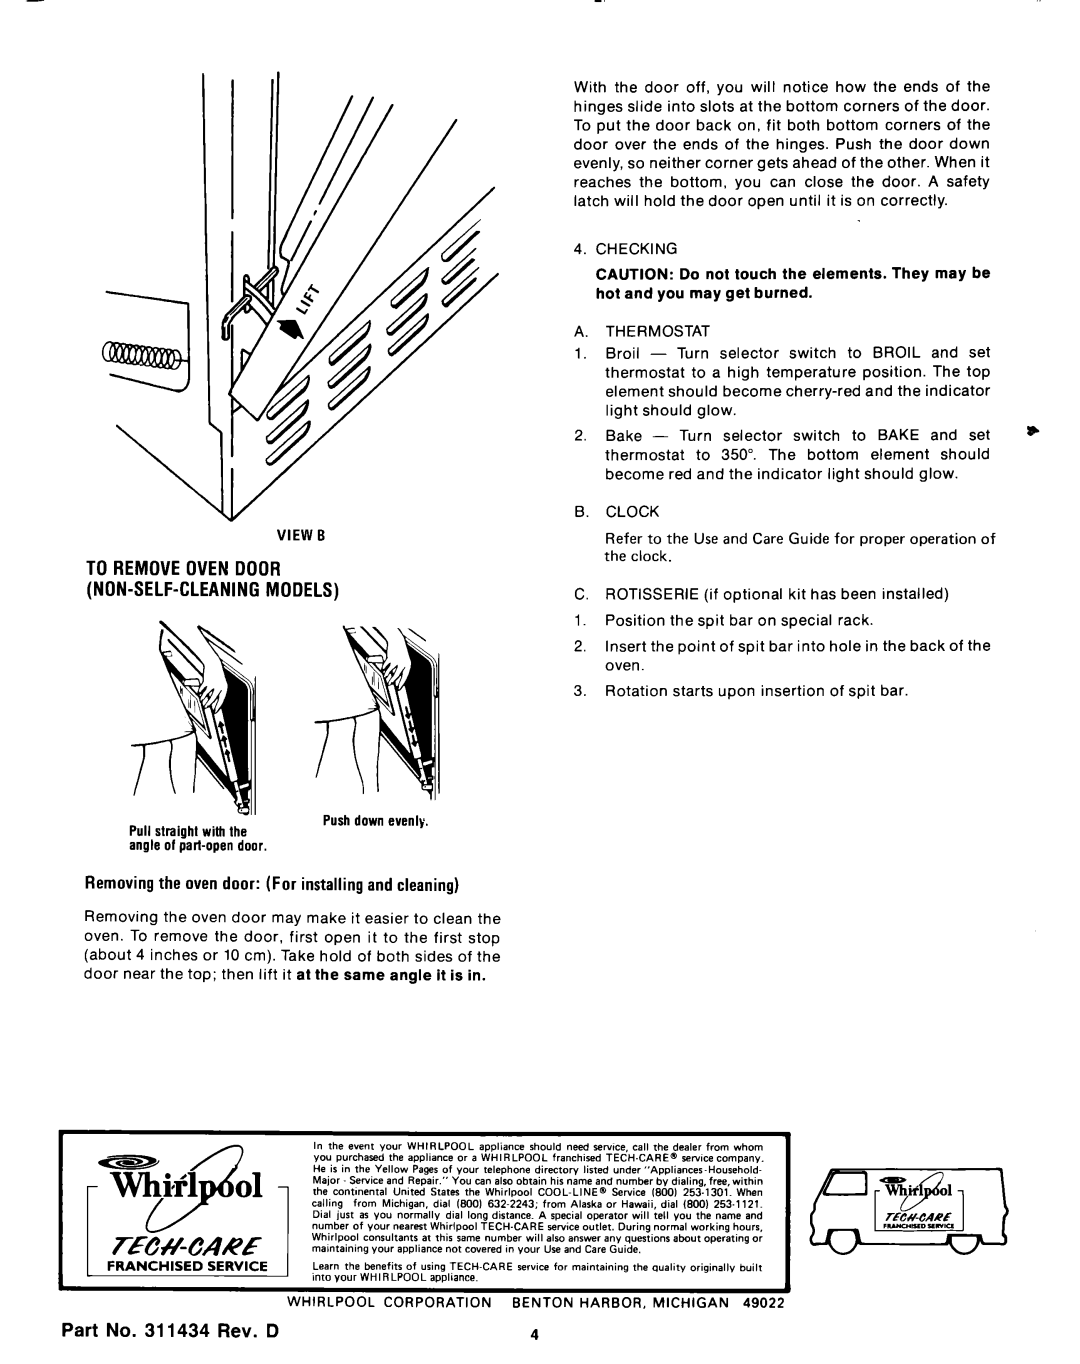 Whirlpool 1982 manual To Removeovendoor Non-Self-Cleaningmodels, angleof pa+opendoor, Part No. 311434 Rev. D 